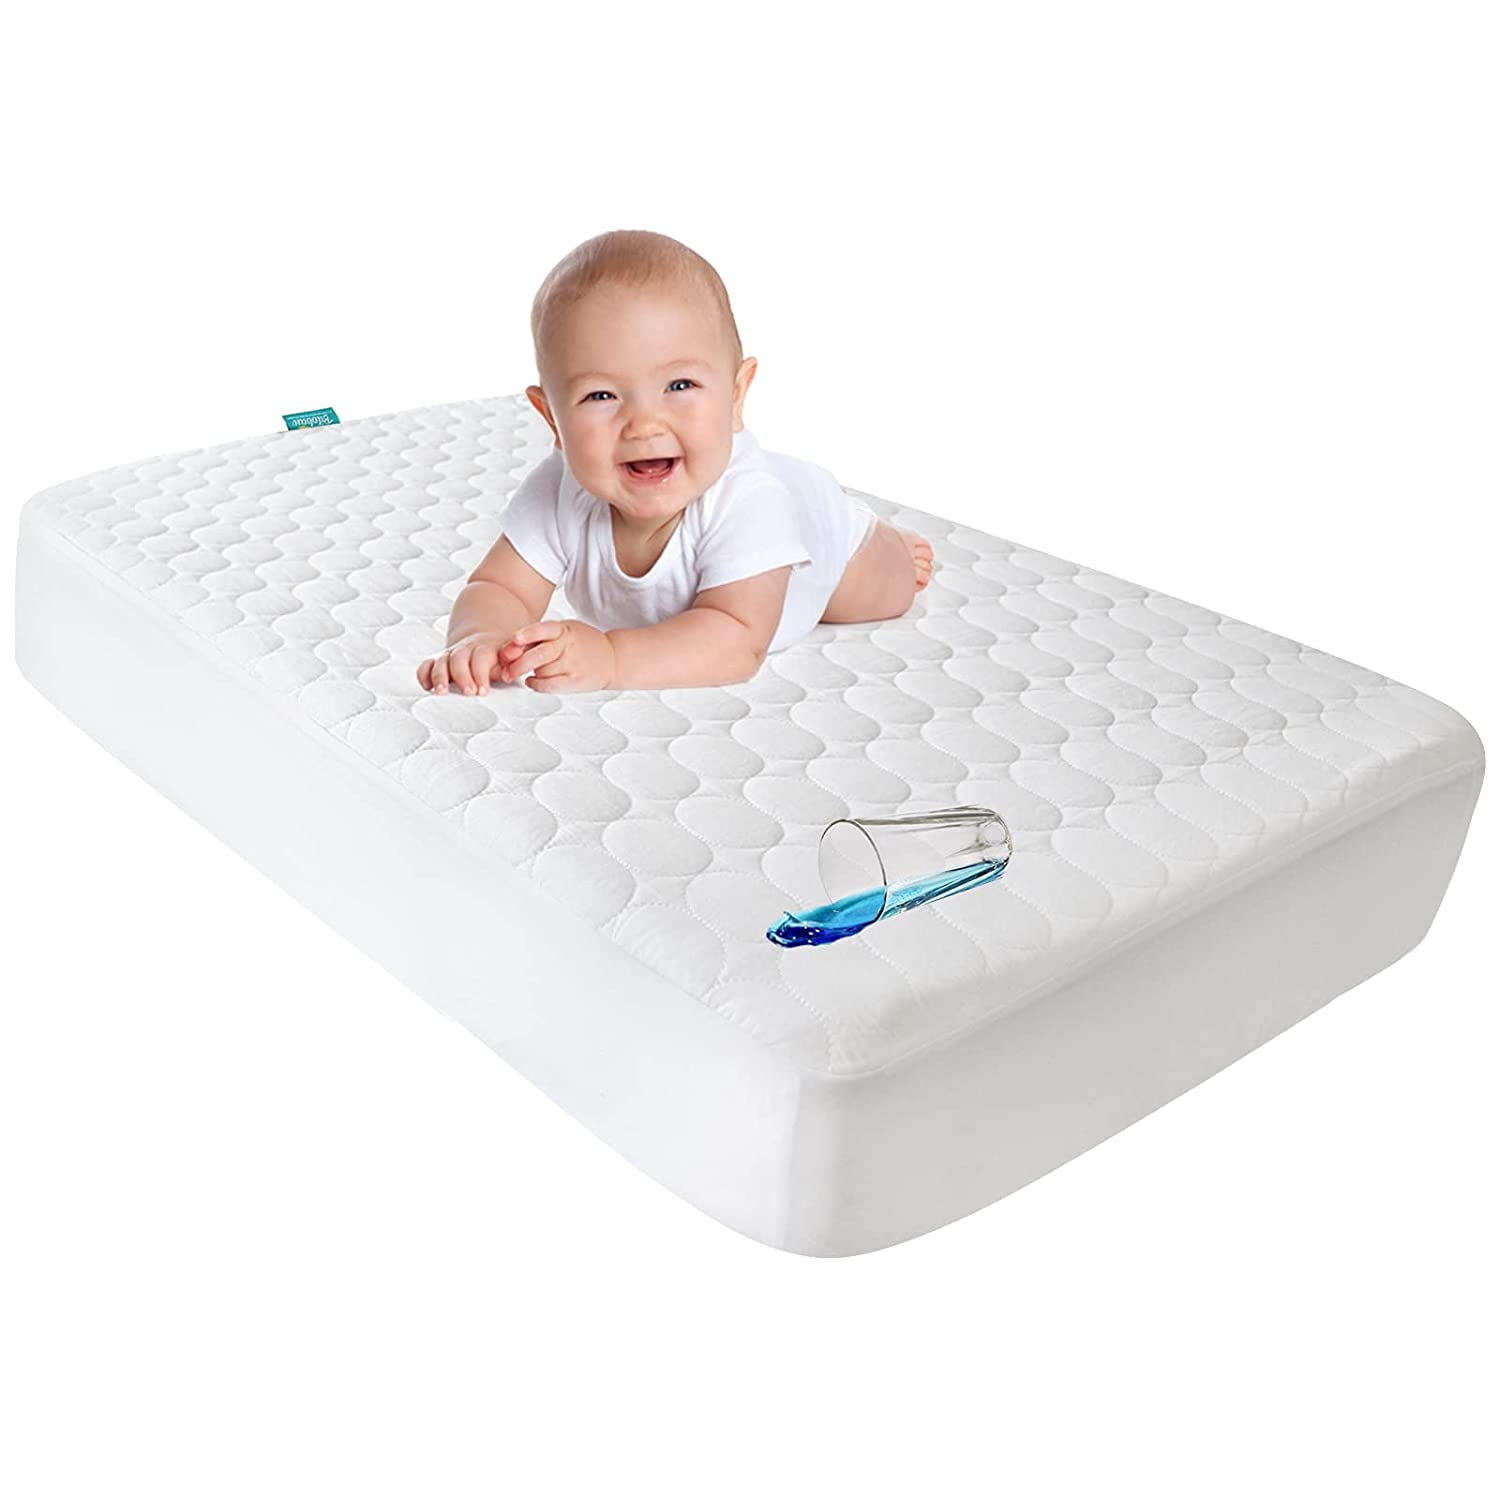 Crib Cradle Swing Fully Breathable Waterproof Mattress Made to British Standards 